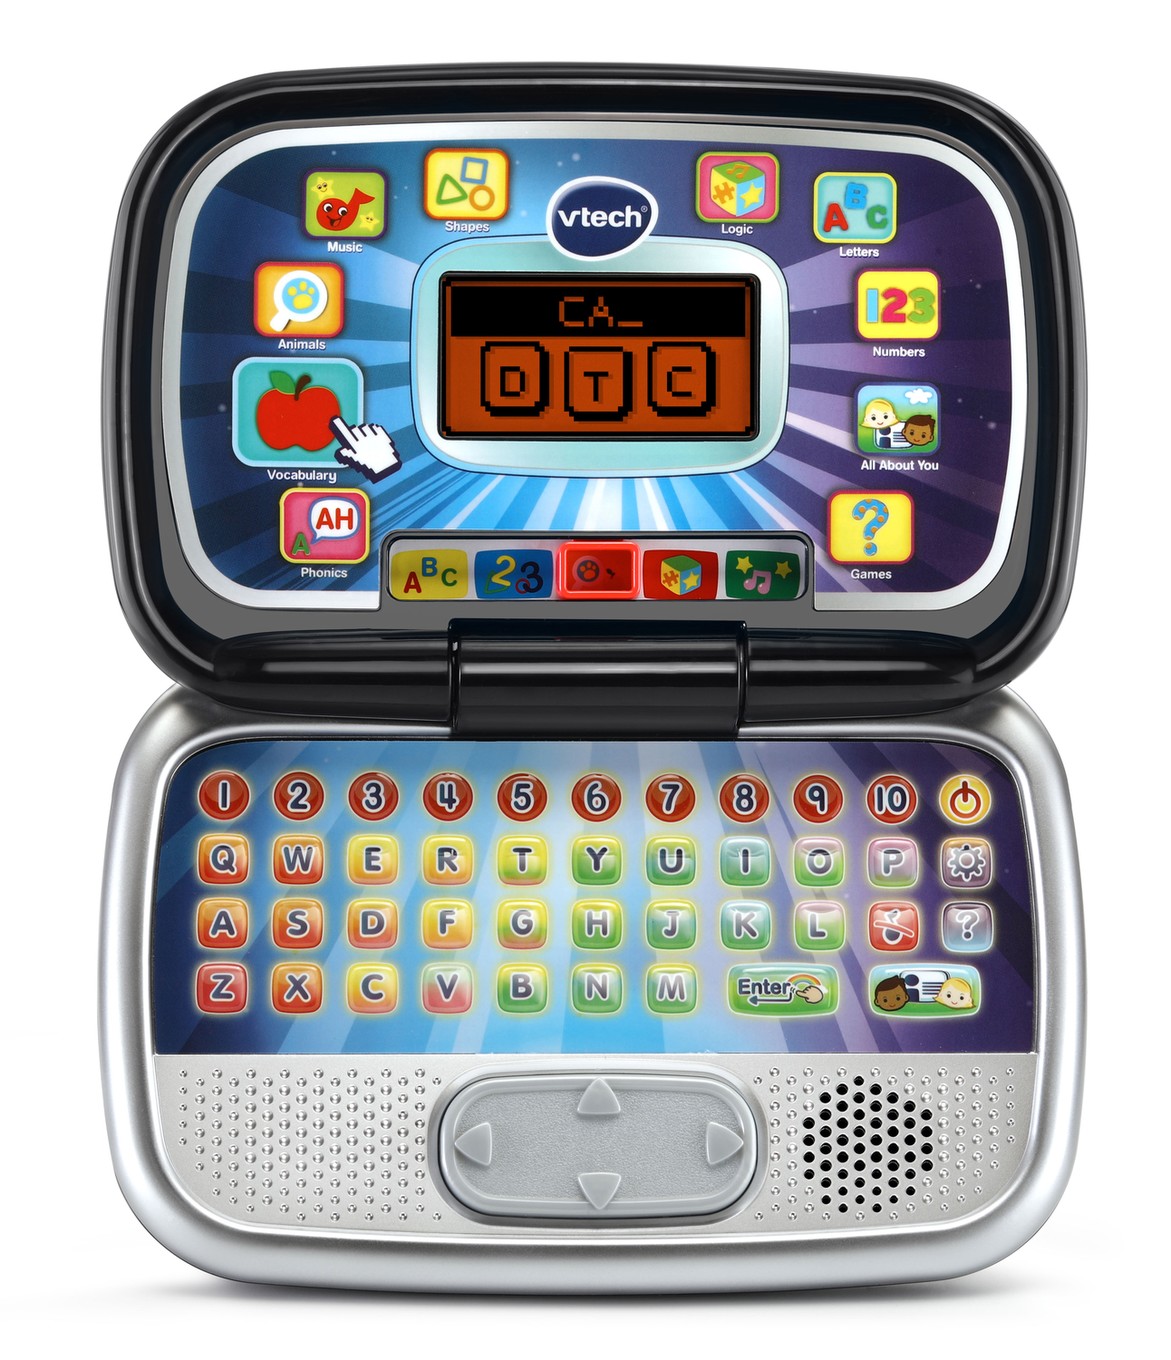 VTECH BLUE LEARNING LAPTOP PC LEARN ENGLISH EDUCATIONAL TOY 